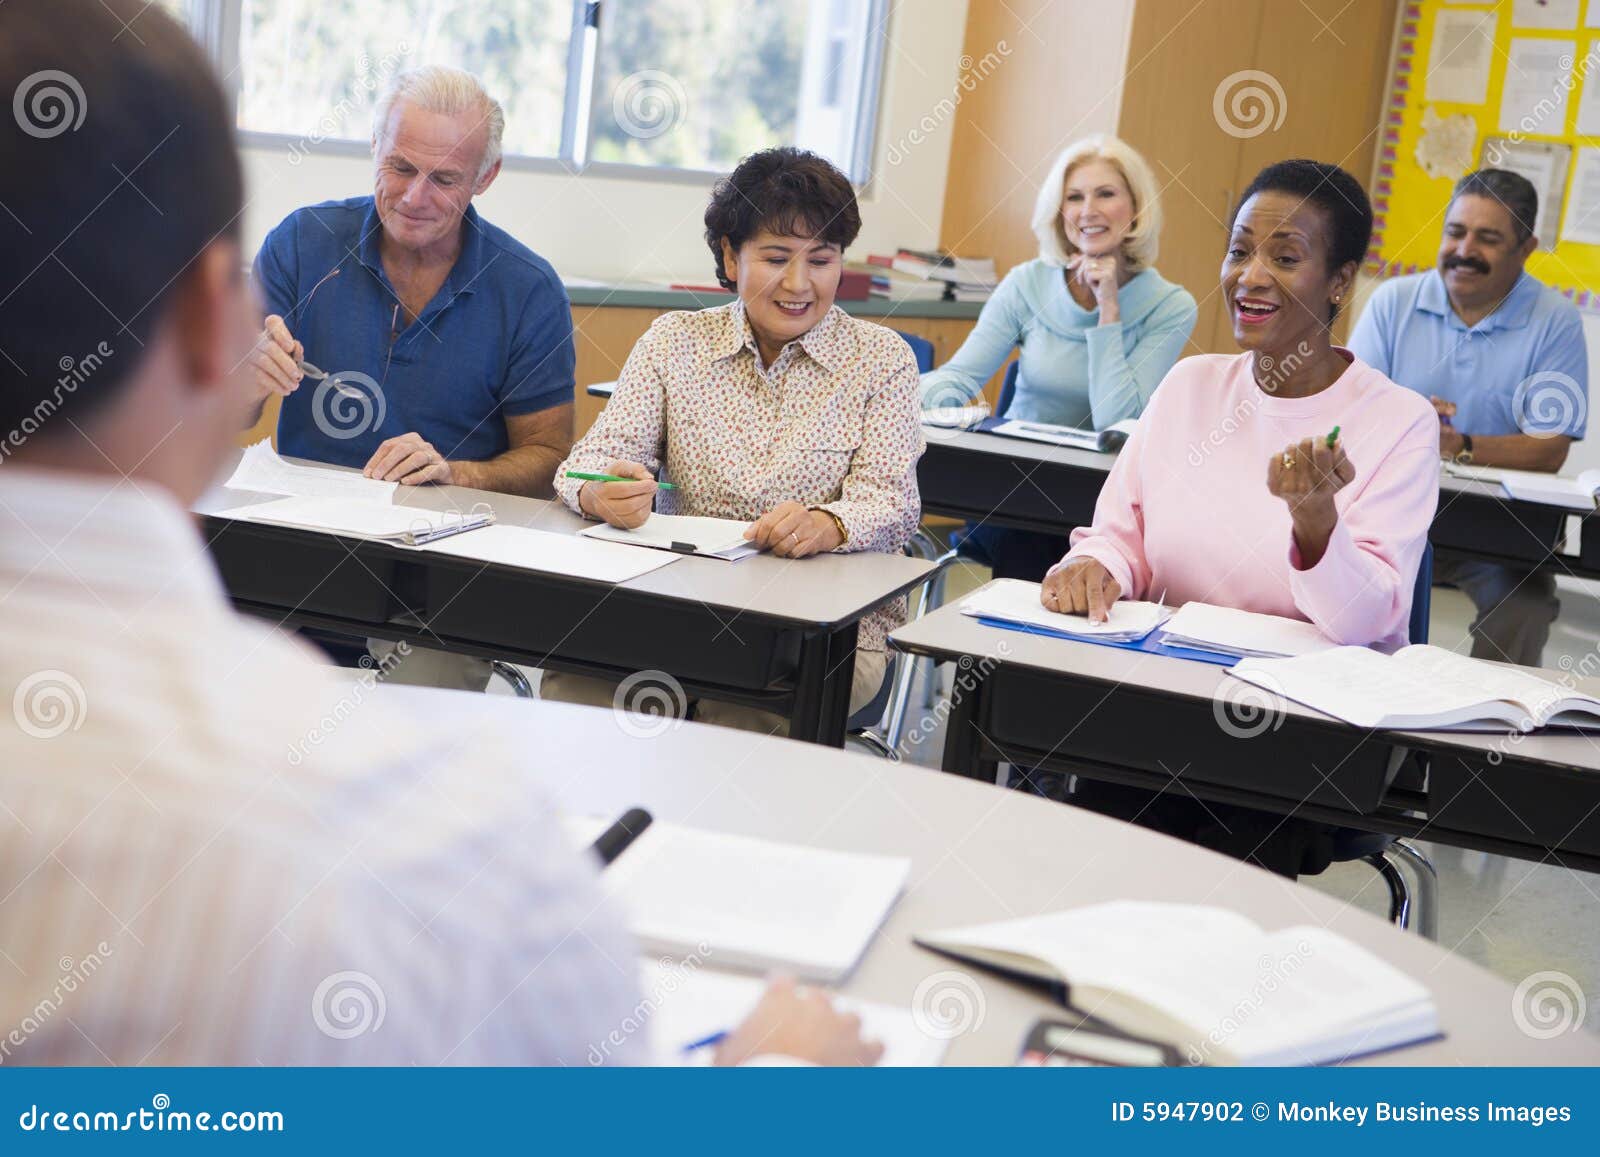 mature students and their teacher in a classroom